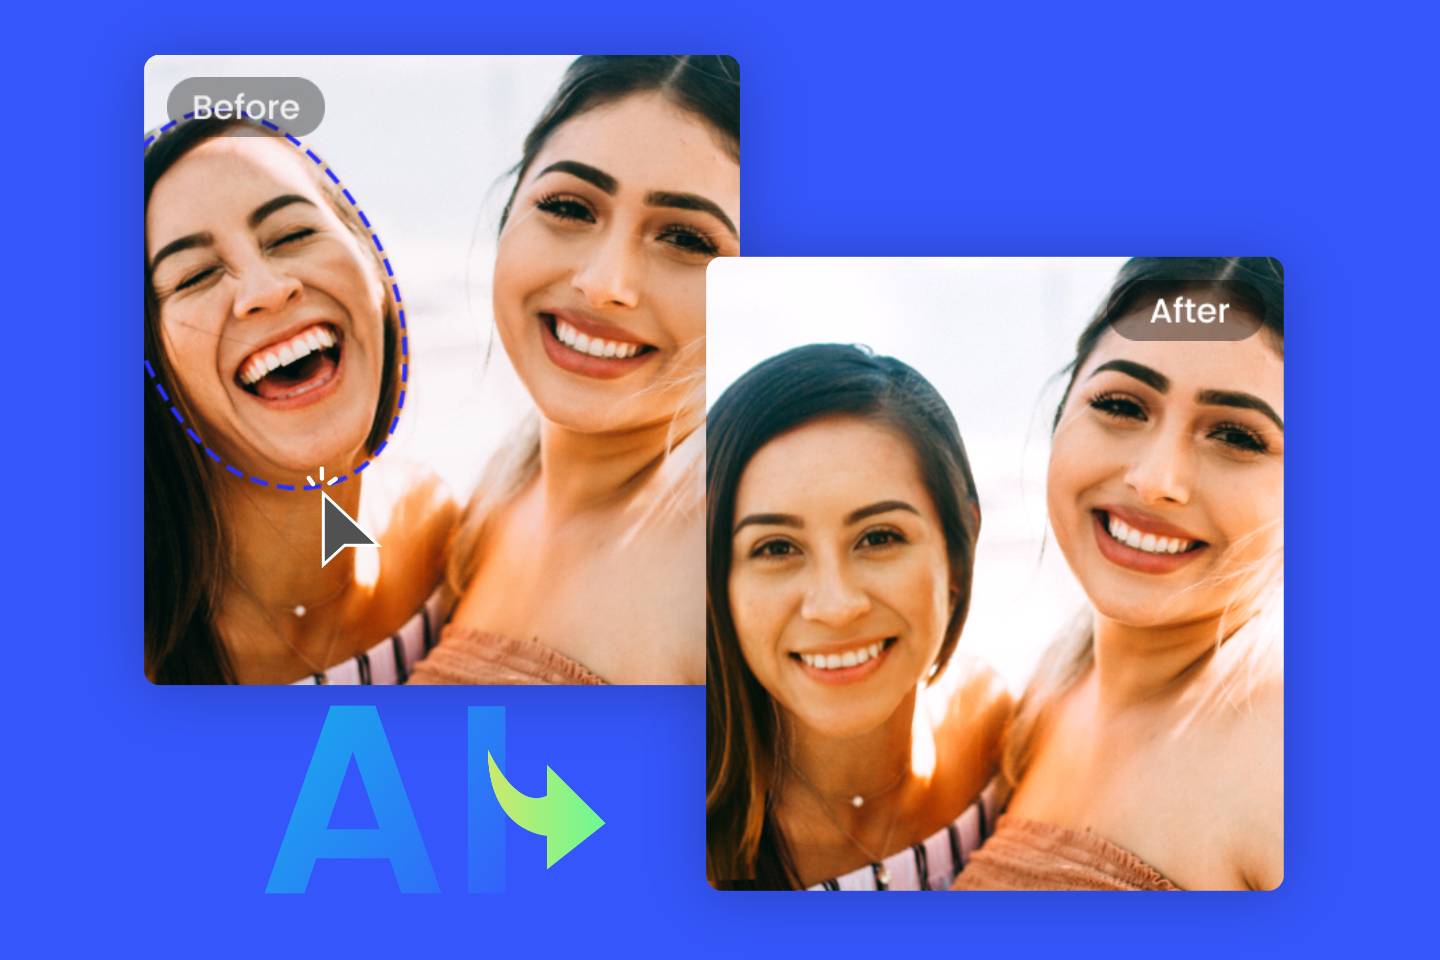 Swap head on photo online in seconds with Fotor's free AI head swap tool